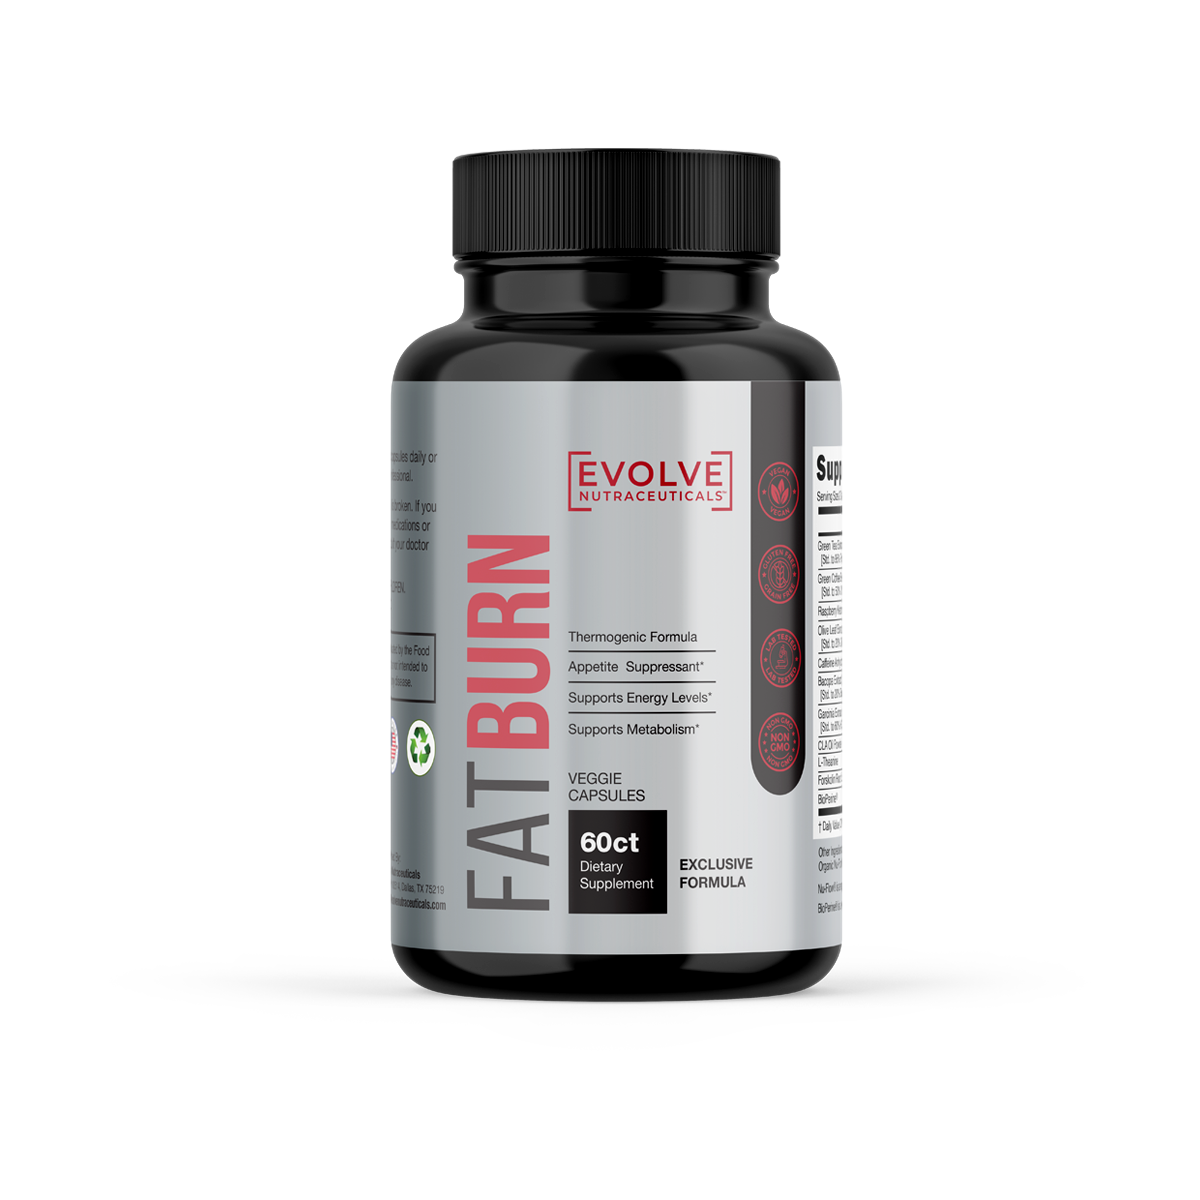 Fat Burn, Weight Loss Supplement, Energy Booster - Green Tea Extract, Green Coffee Bean Extract, Raspberry Ketone